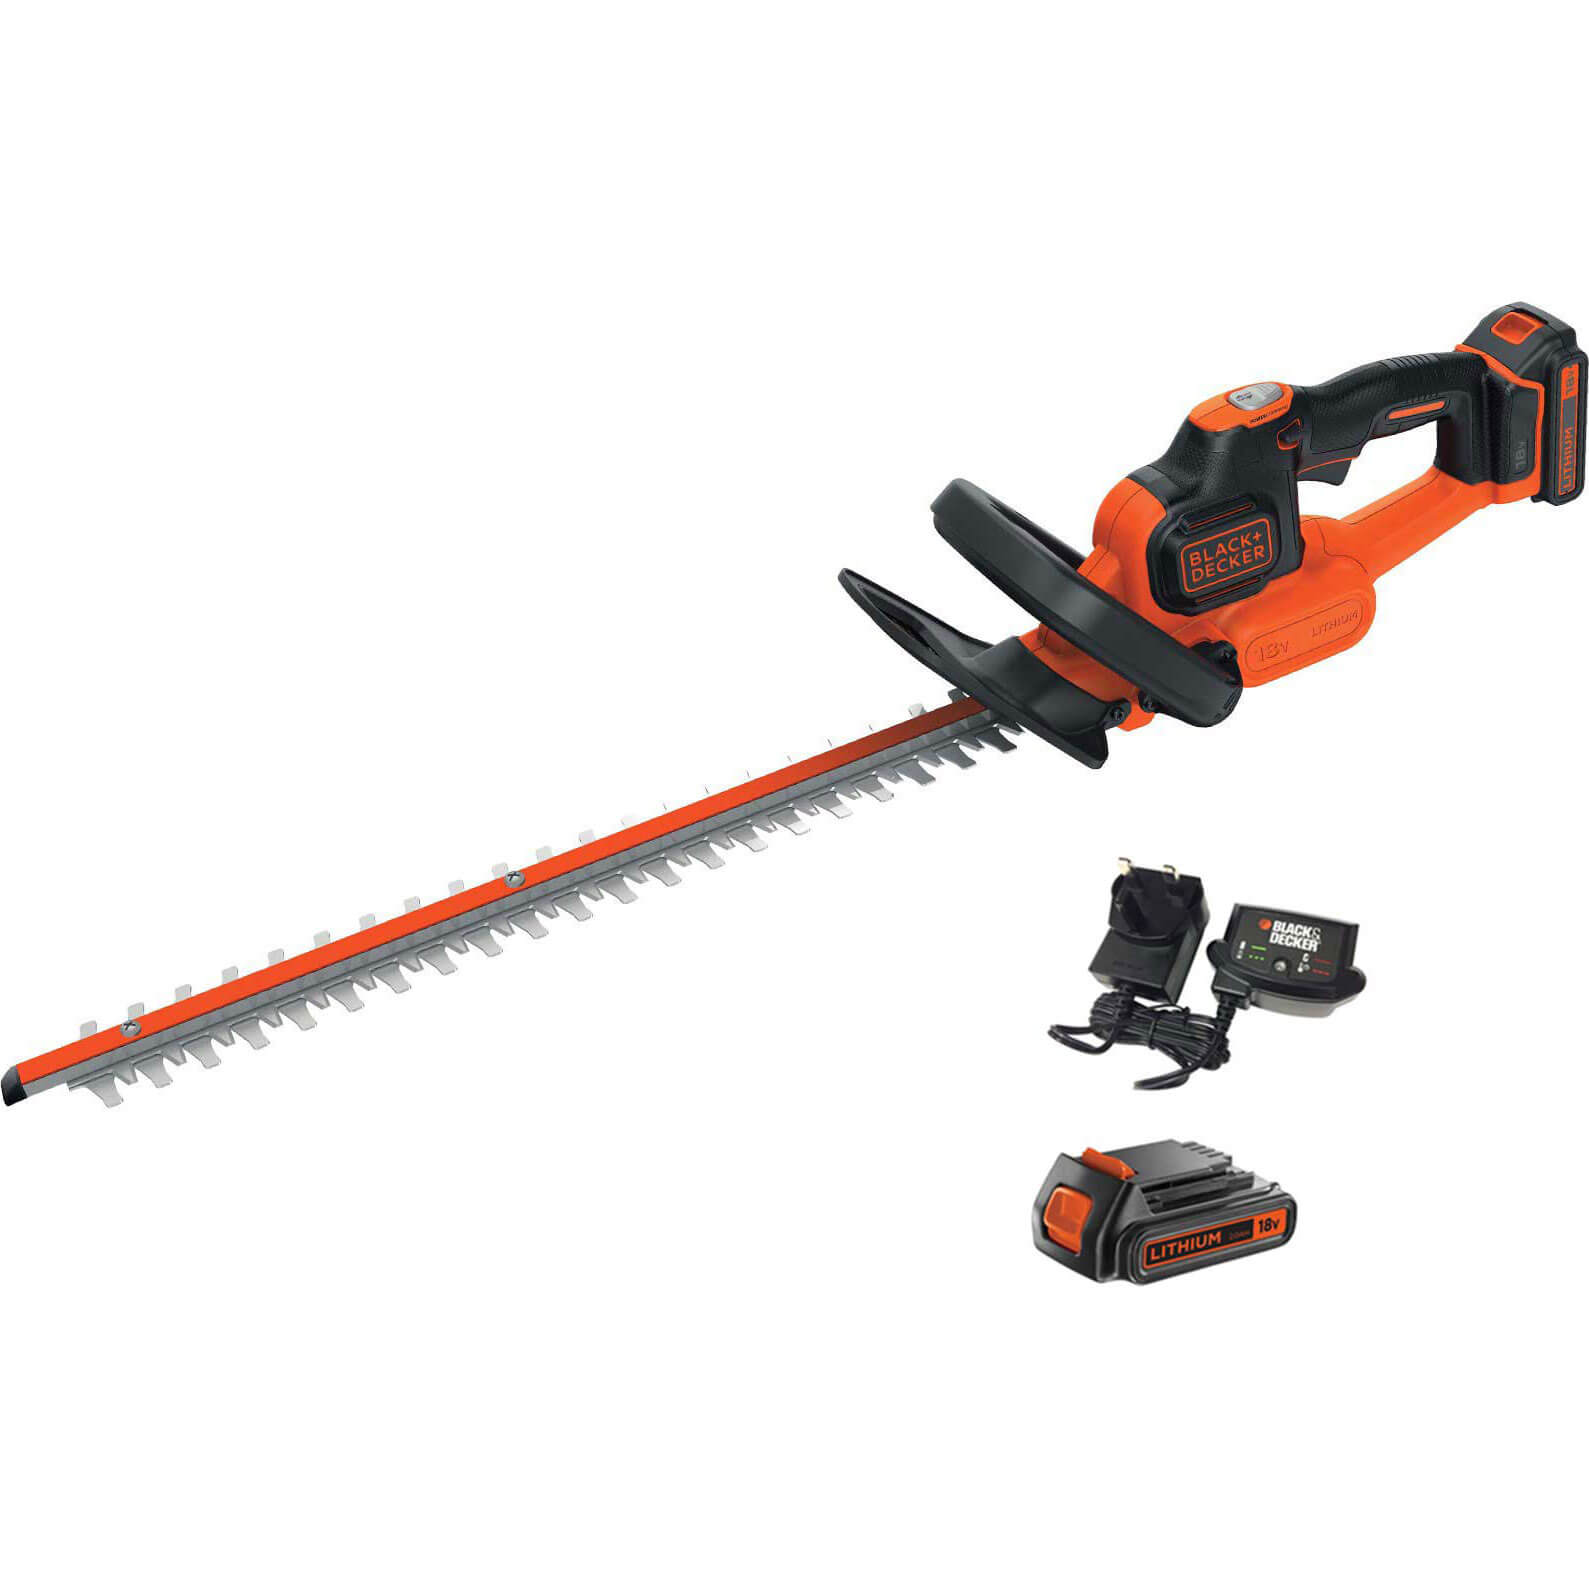 Image of Black and Decker GTC18452PC 18v Cordless Hedge Trimmer 450mm 2 x 2ah Li-ion Charger